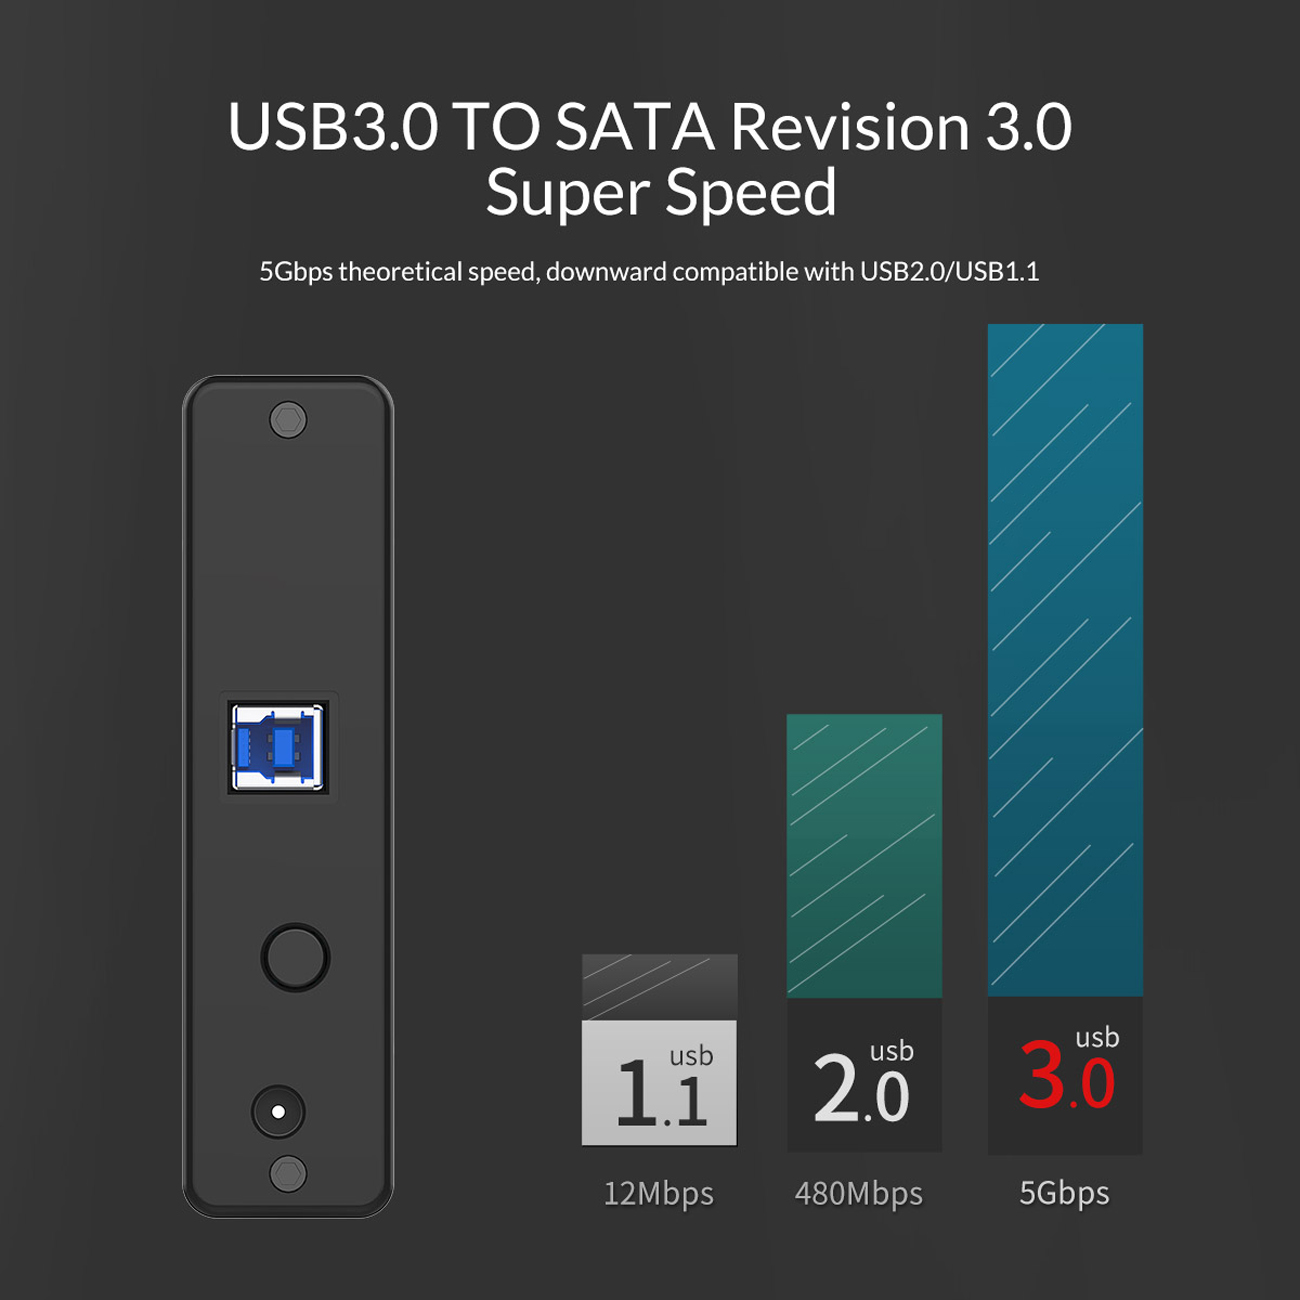 The speed comaprison: USB1.1, USB2.0 and USB3.0.